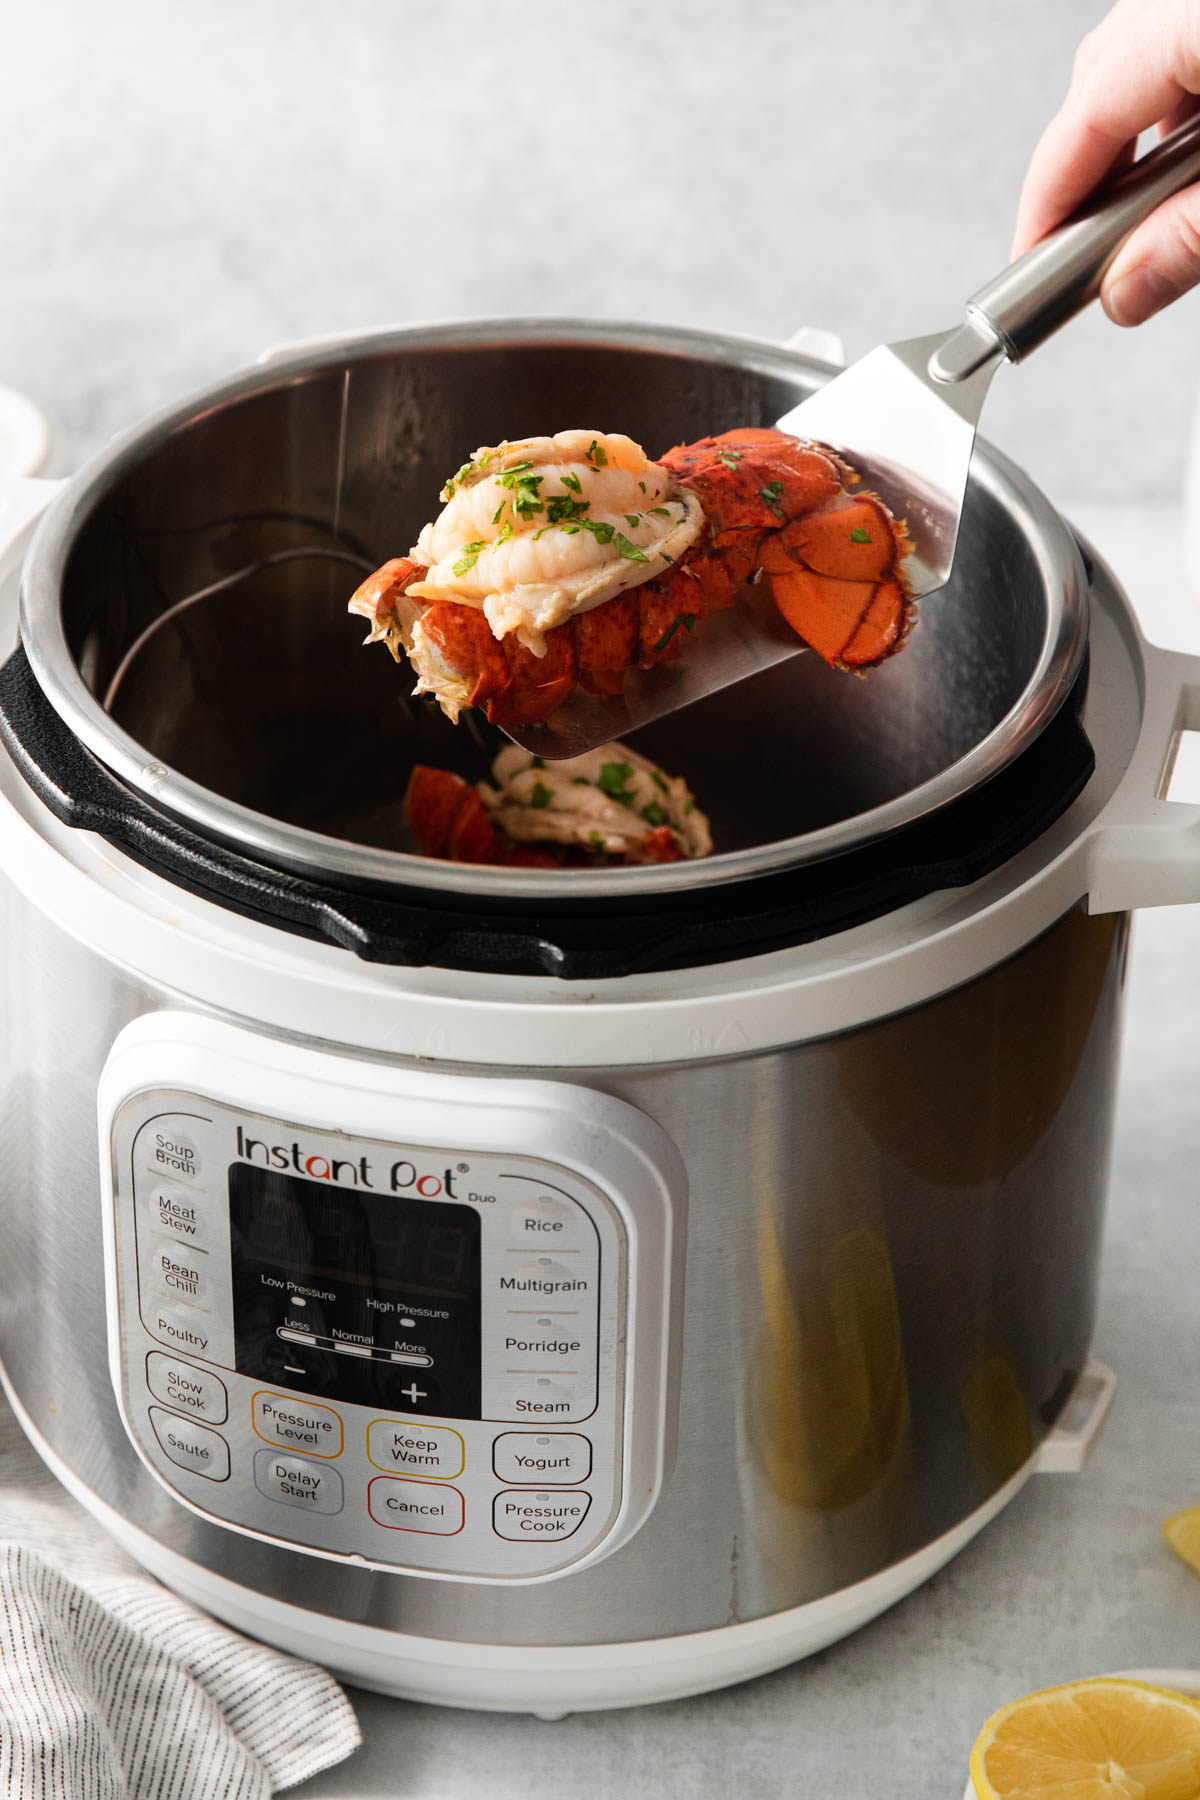 one lobster tail being removed from the instant pot